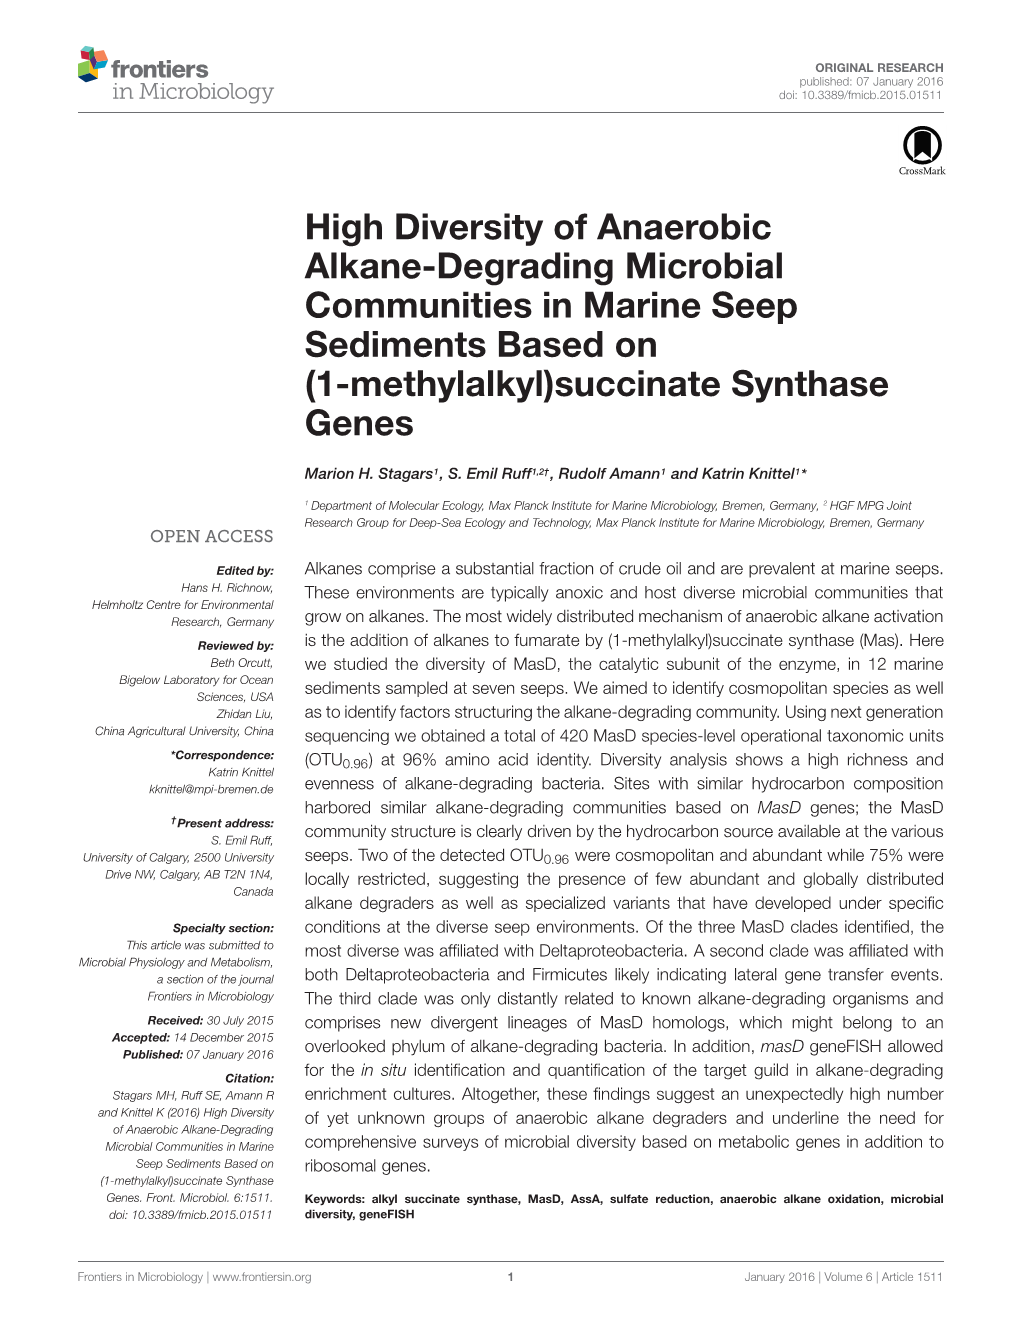 High Diversity of Anaerobic Alkane-Degrading Microbial Communities in Marine Seep Sediments Based on (1-Methylalkyl)Succinate Synthase Genes